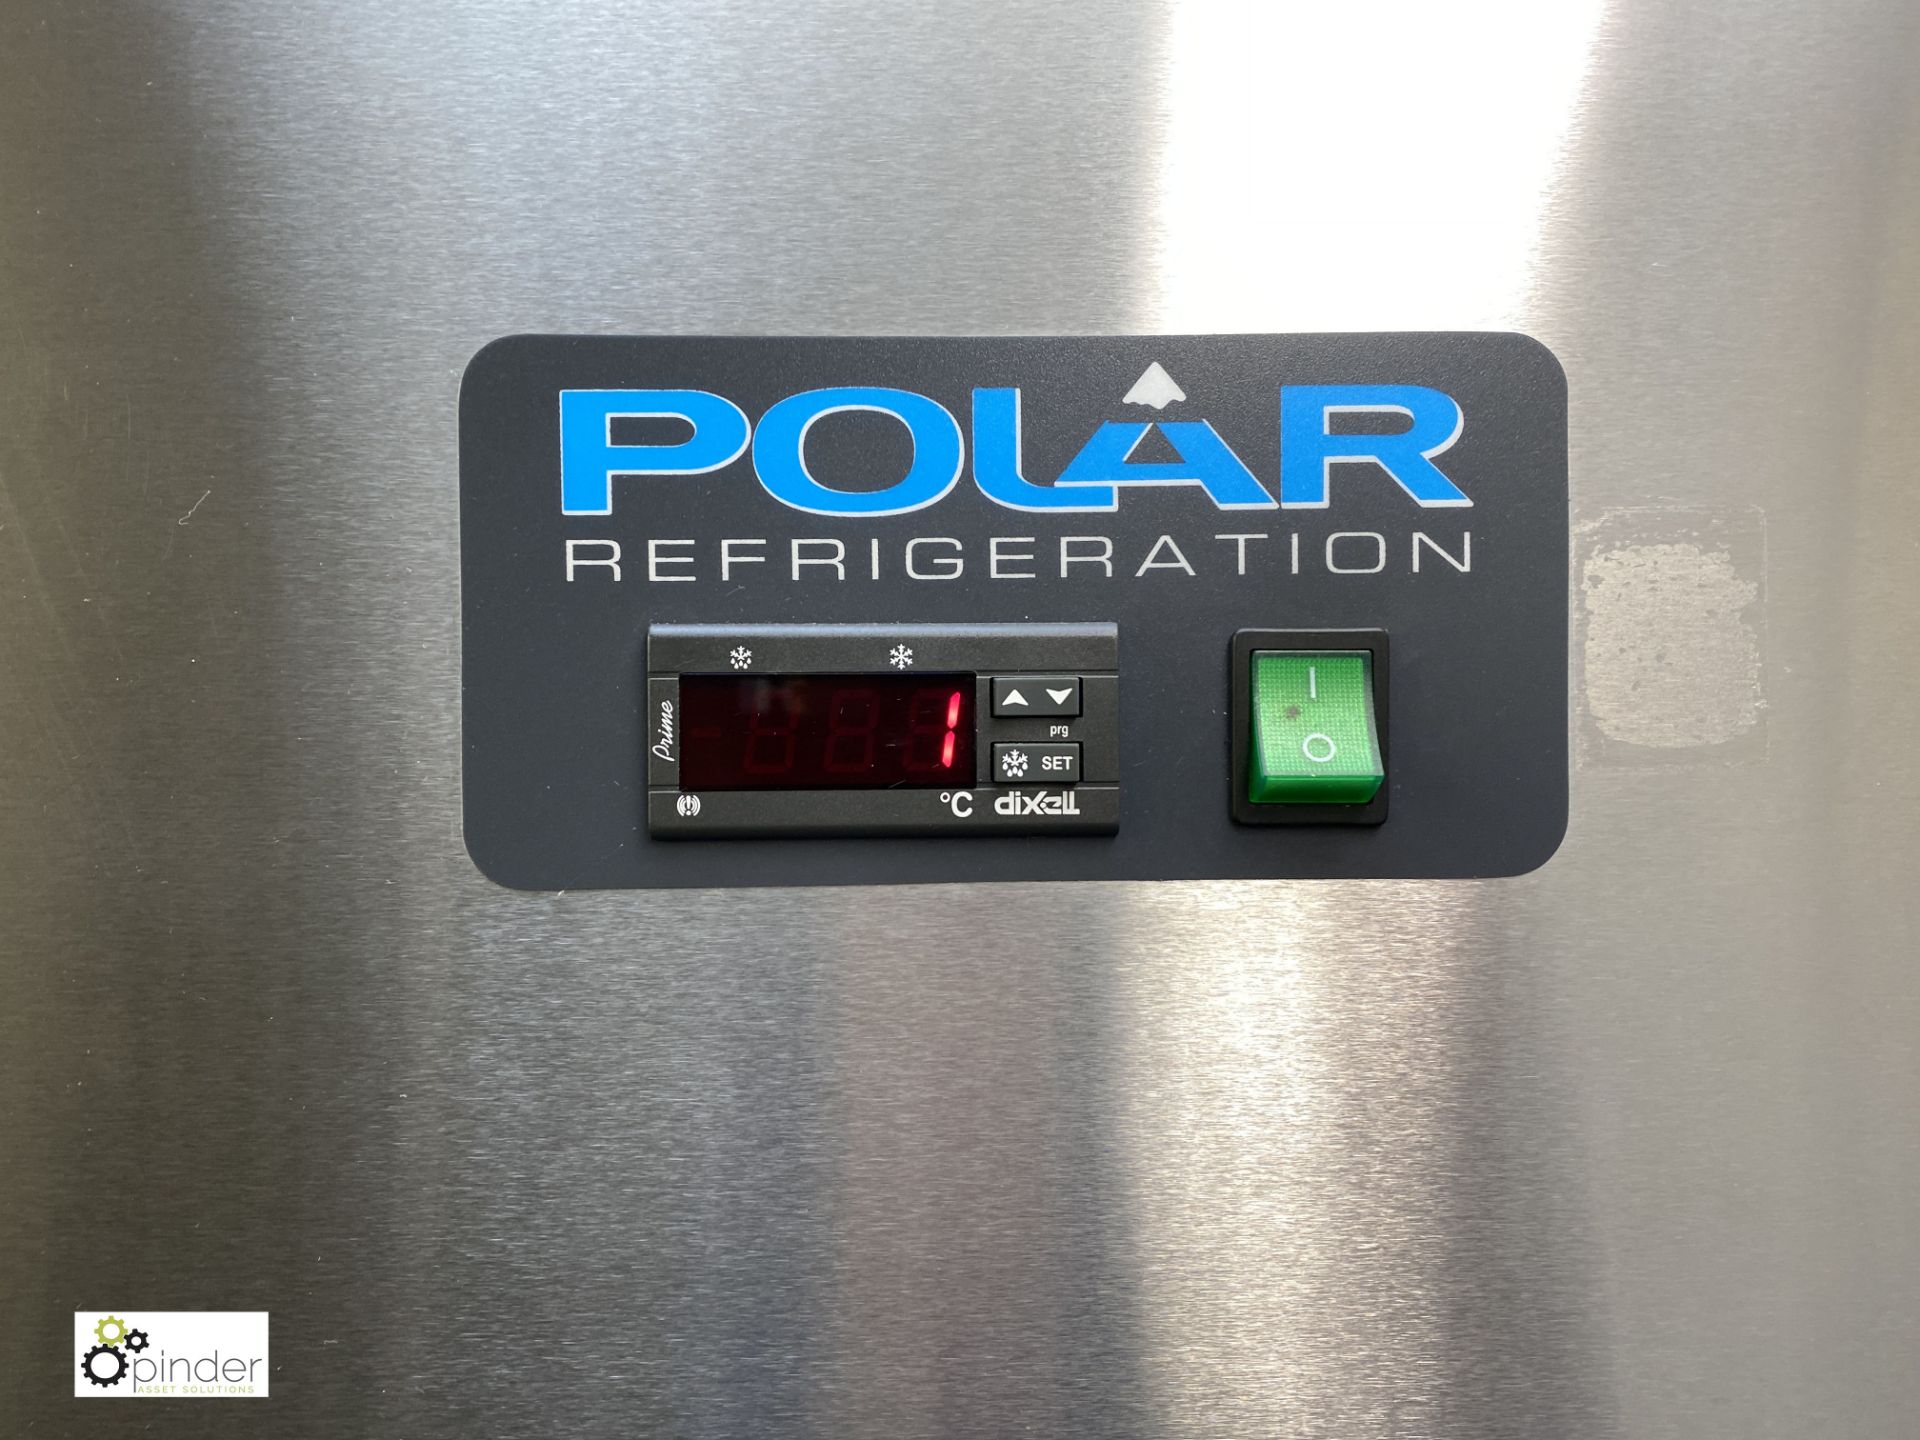 Polar G595 stainless steel mobile double door Fridge, 1340mm x 810mm x 2000mm, 240volts (in Kitchen) - Image 2 of 5